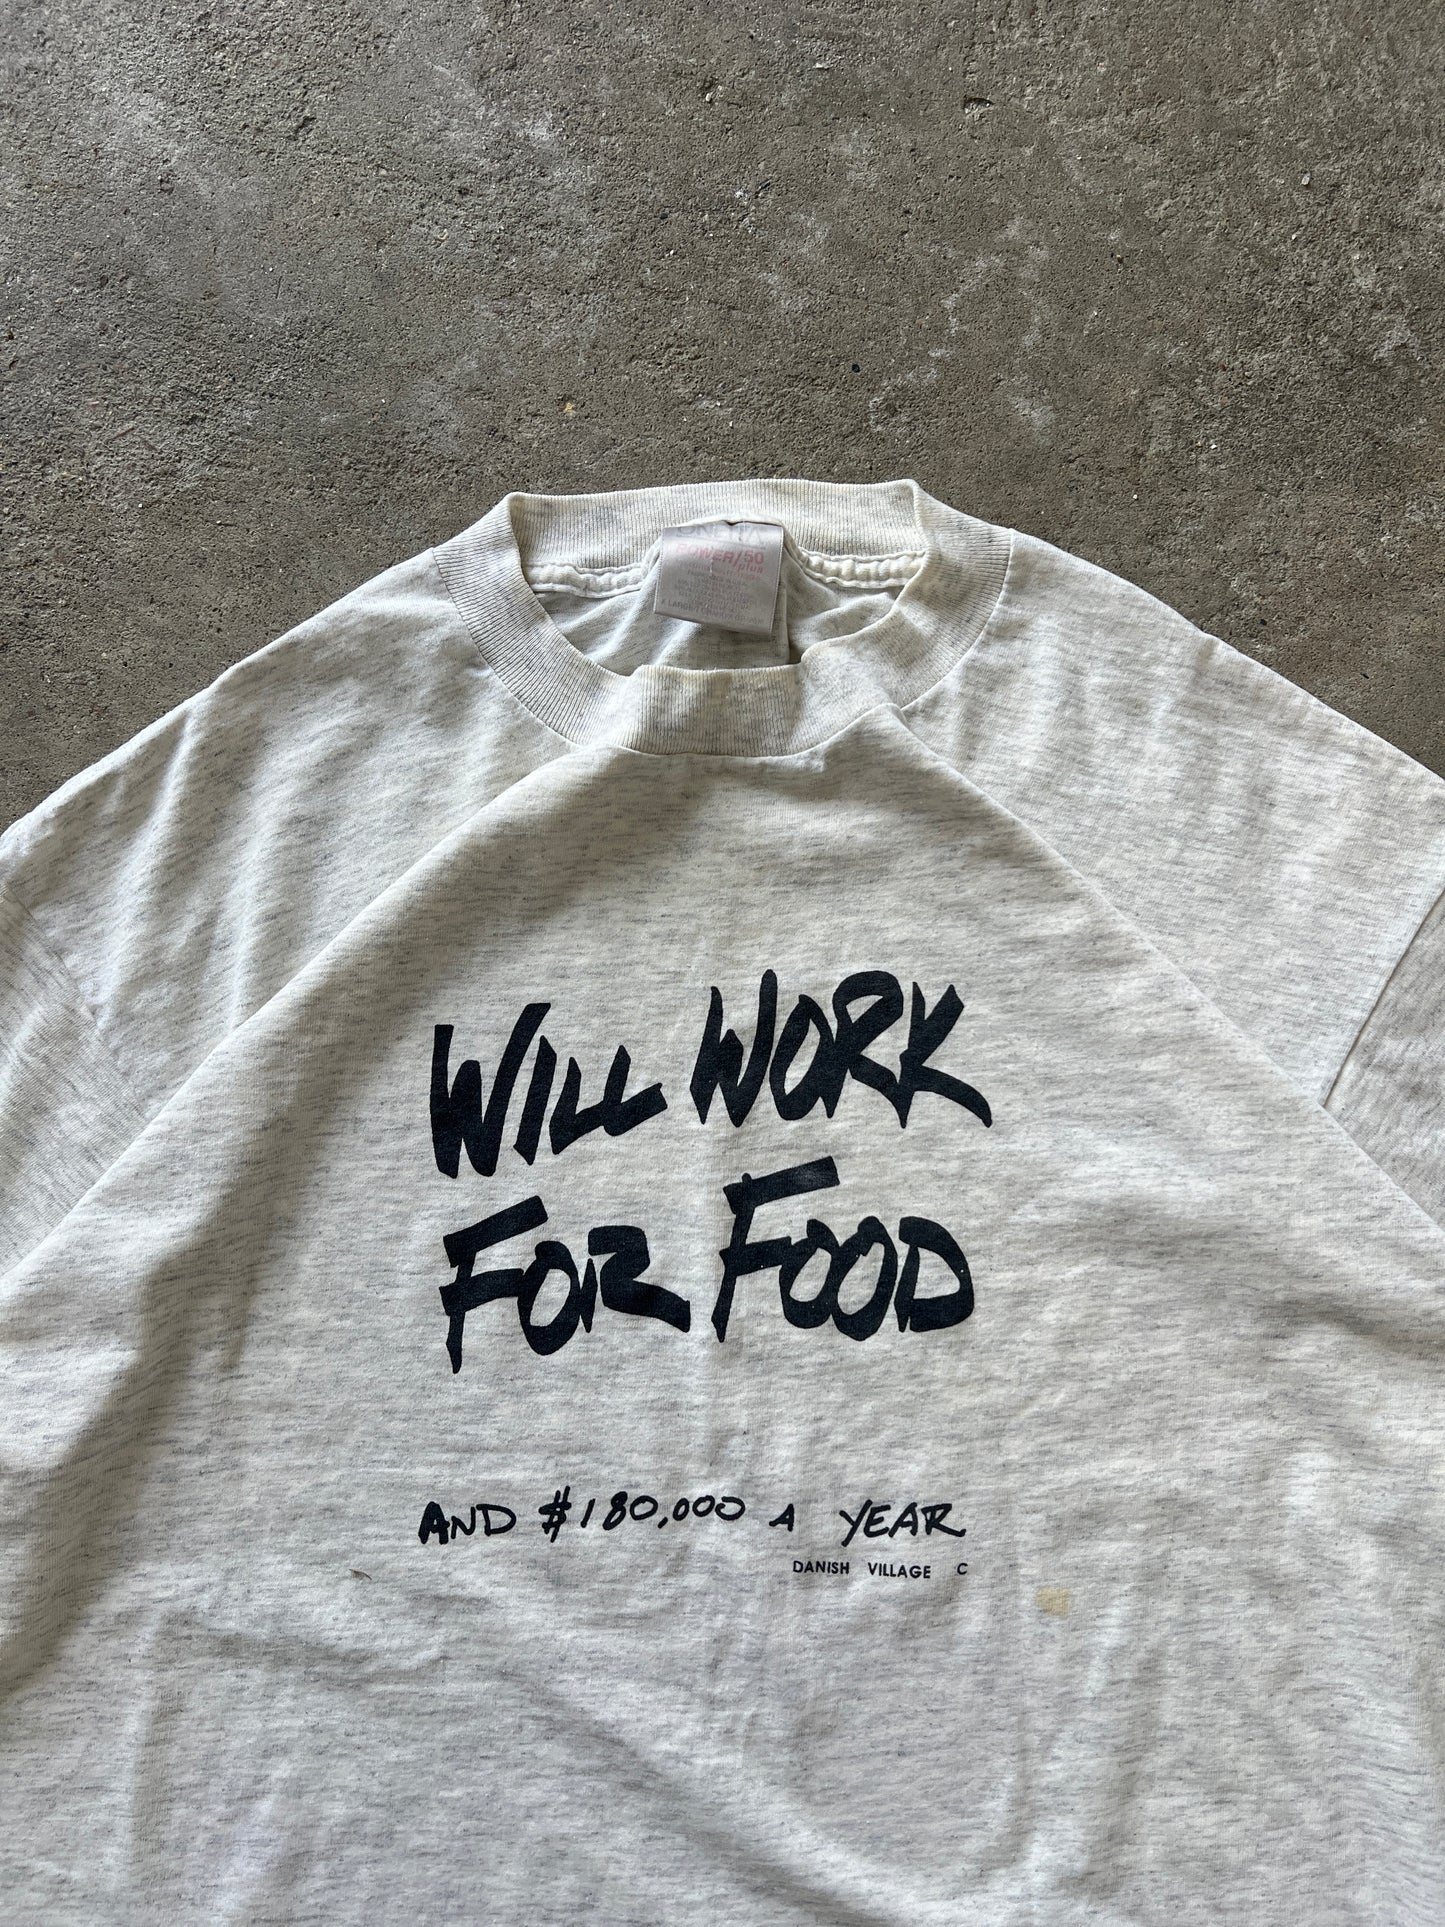 Vintage Will Work For Food Shirt - XL